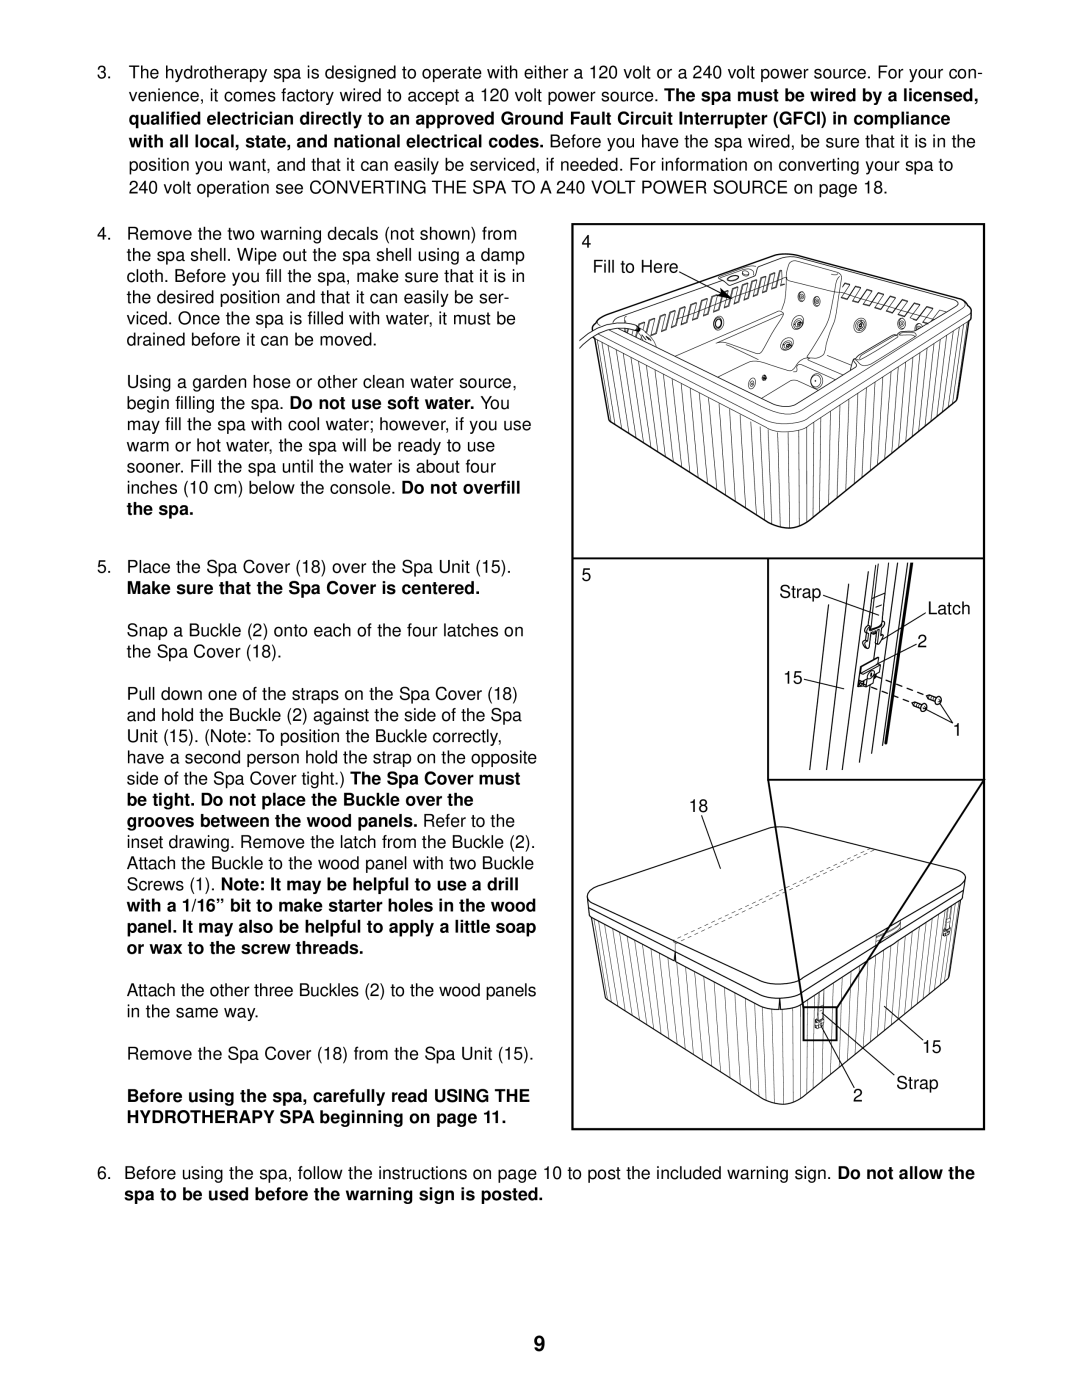 Inter-Tel 831.10507 user manual with all local, state, and national electrical codes, Do not use soft water, the spa 